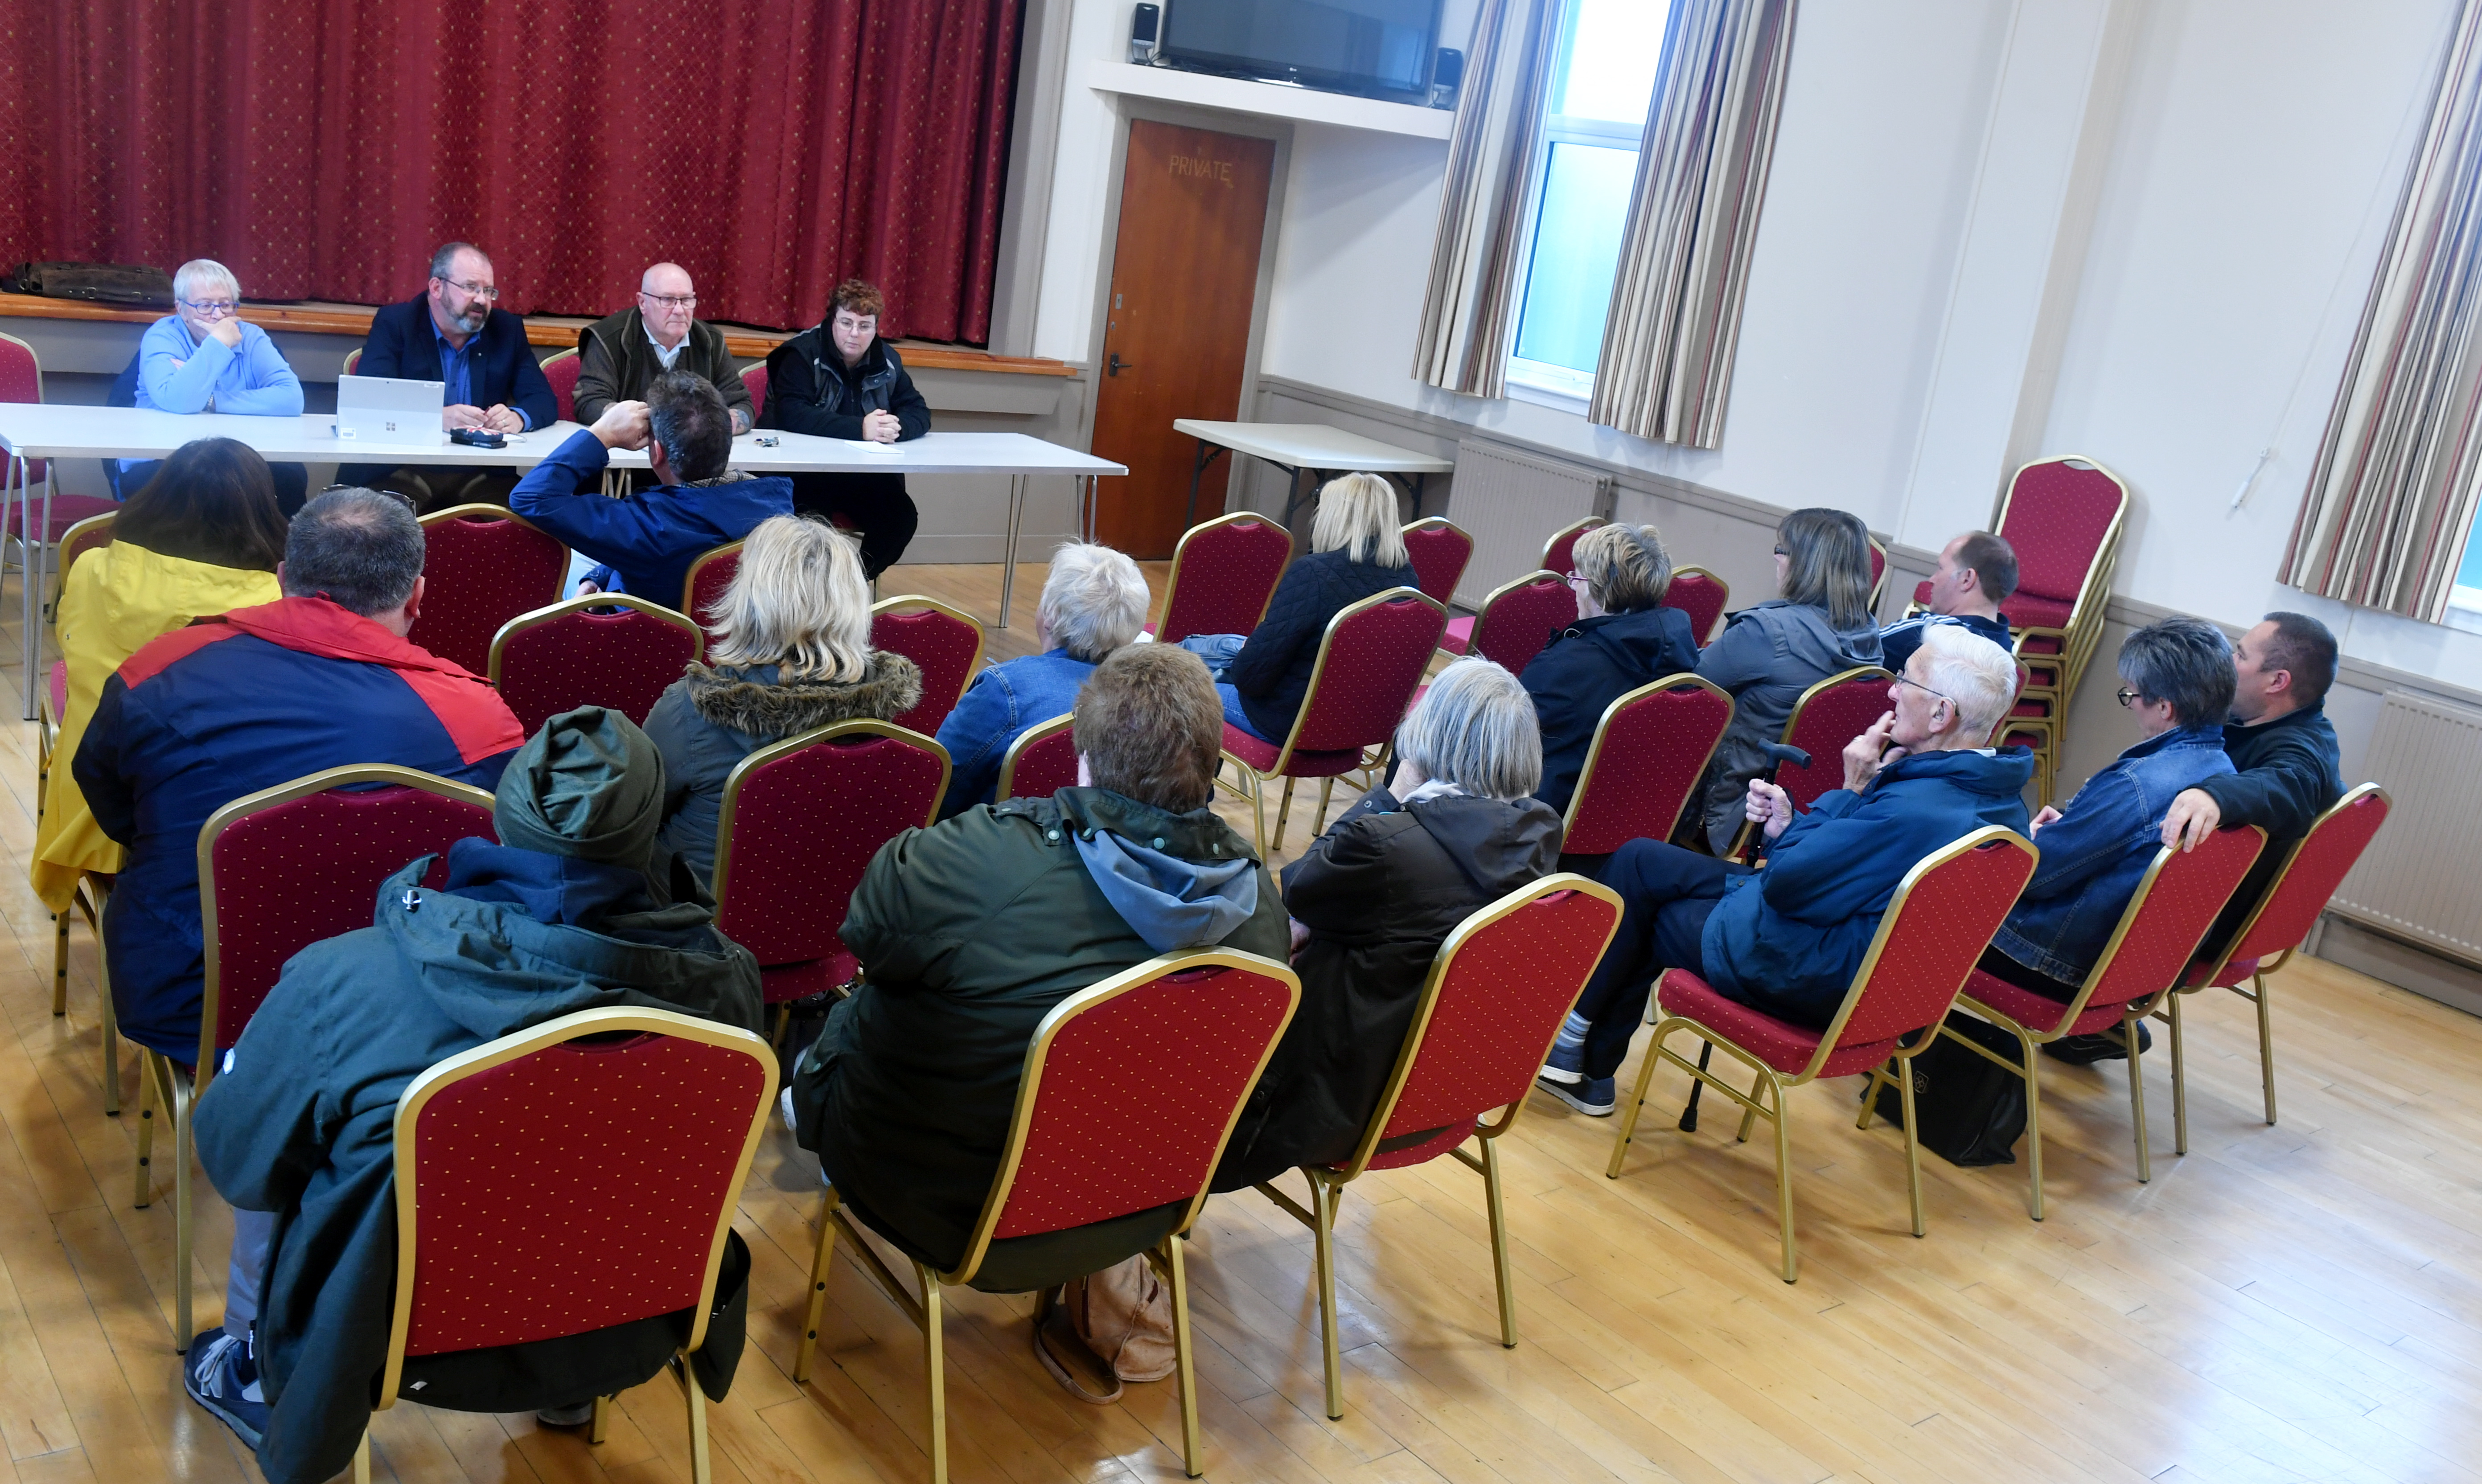 Banff and district Community Safety Group held a meeting at Buchan Street Hall to discuss what they can possibly do to try to reverse the decision to close the Chalmers Hospital MIU overnight. Picture by Chris Sumner